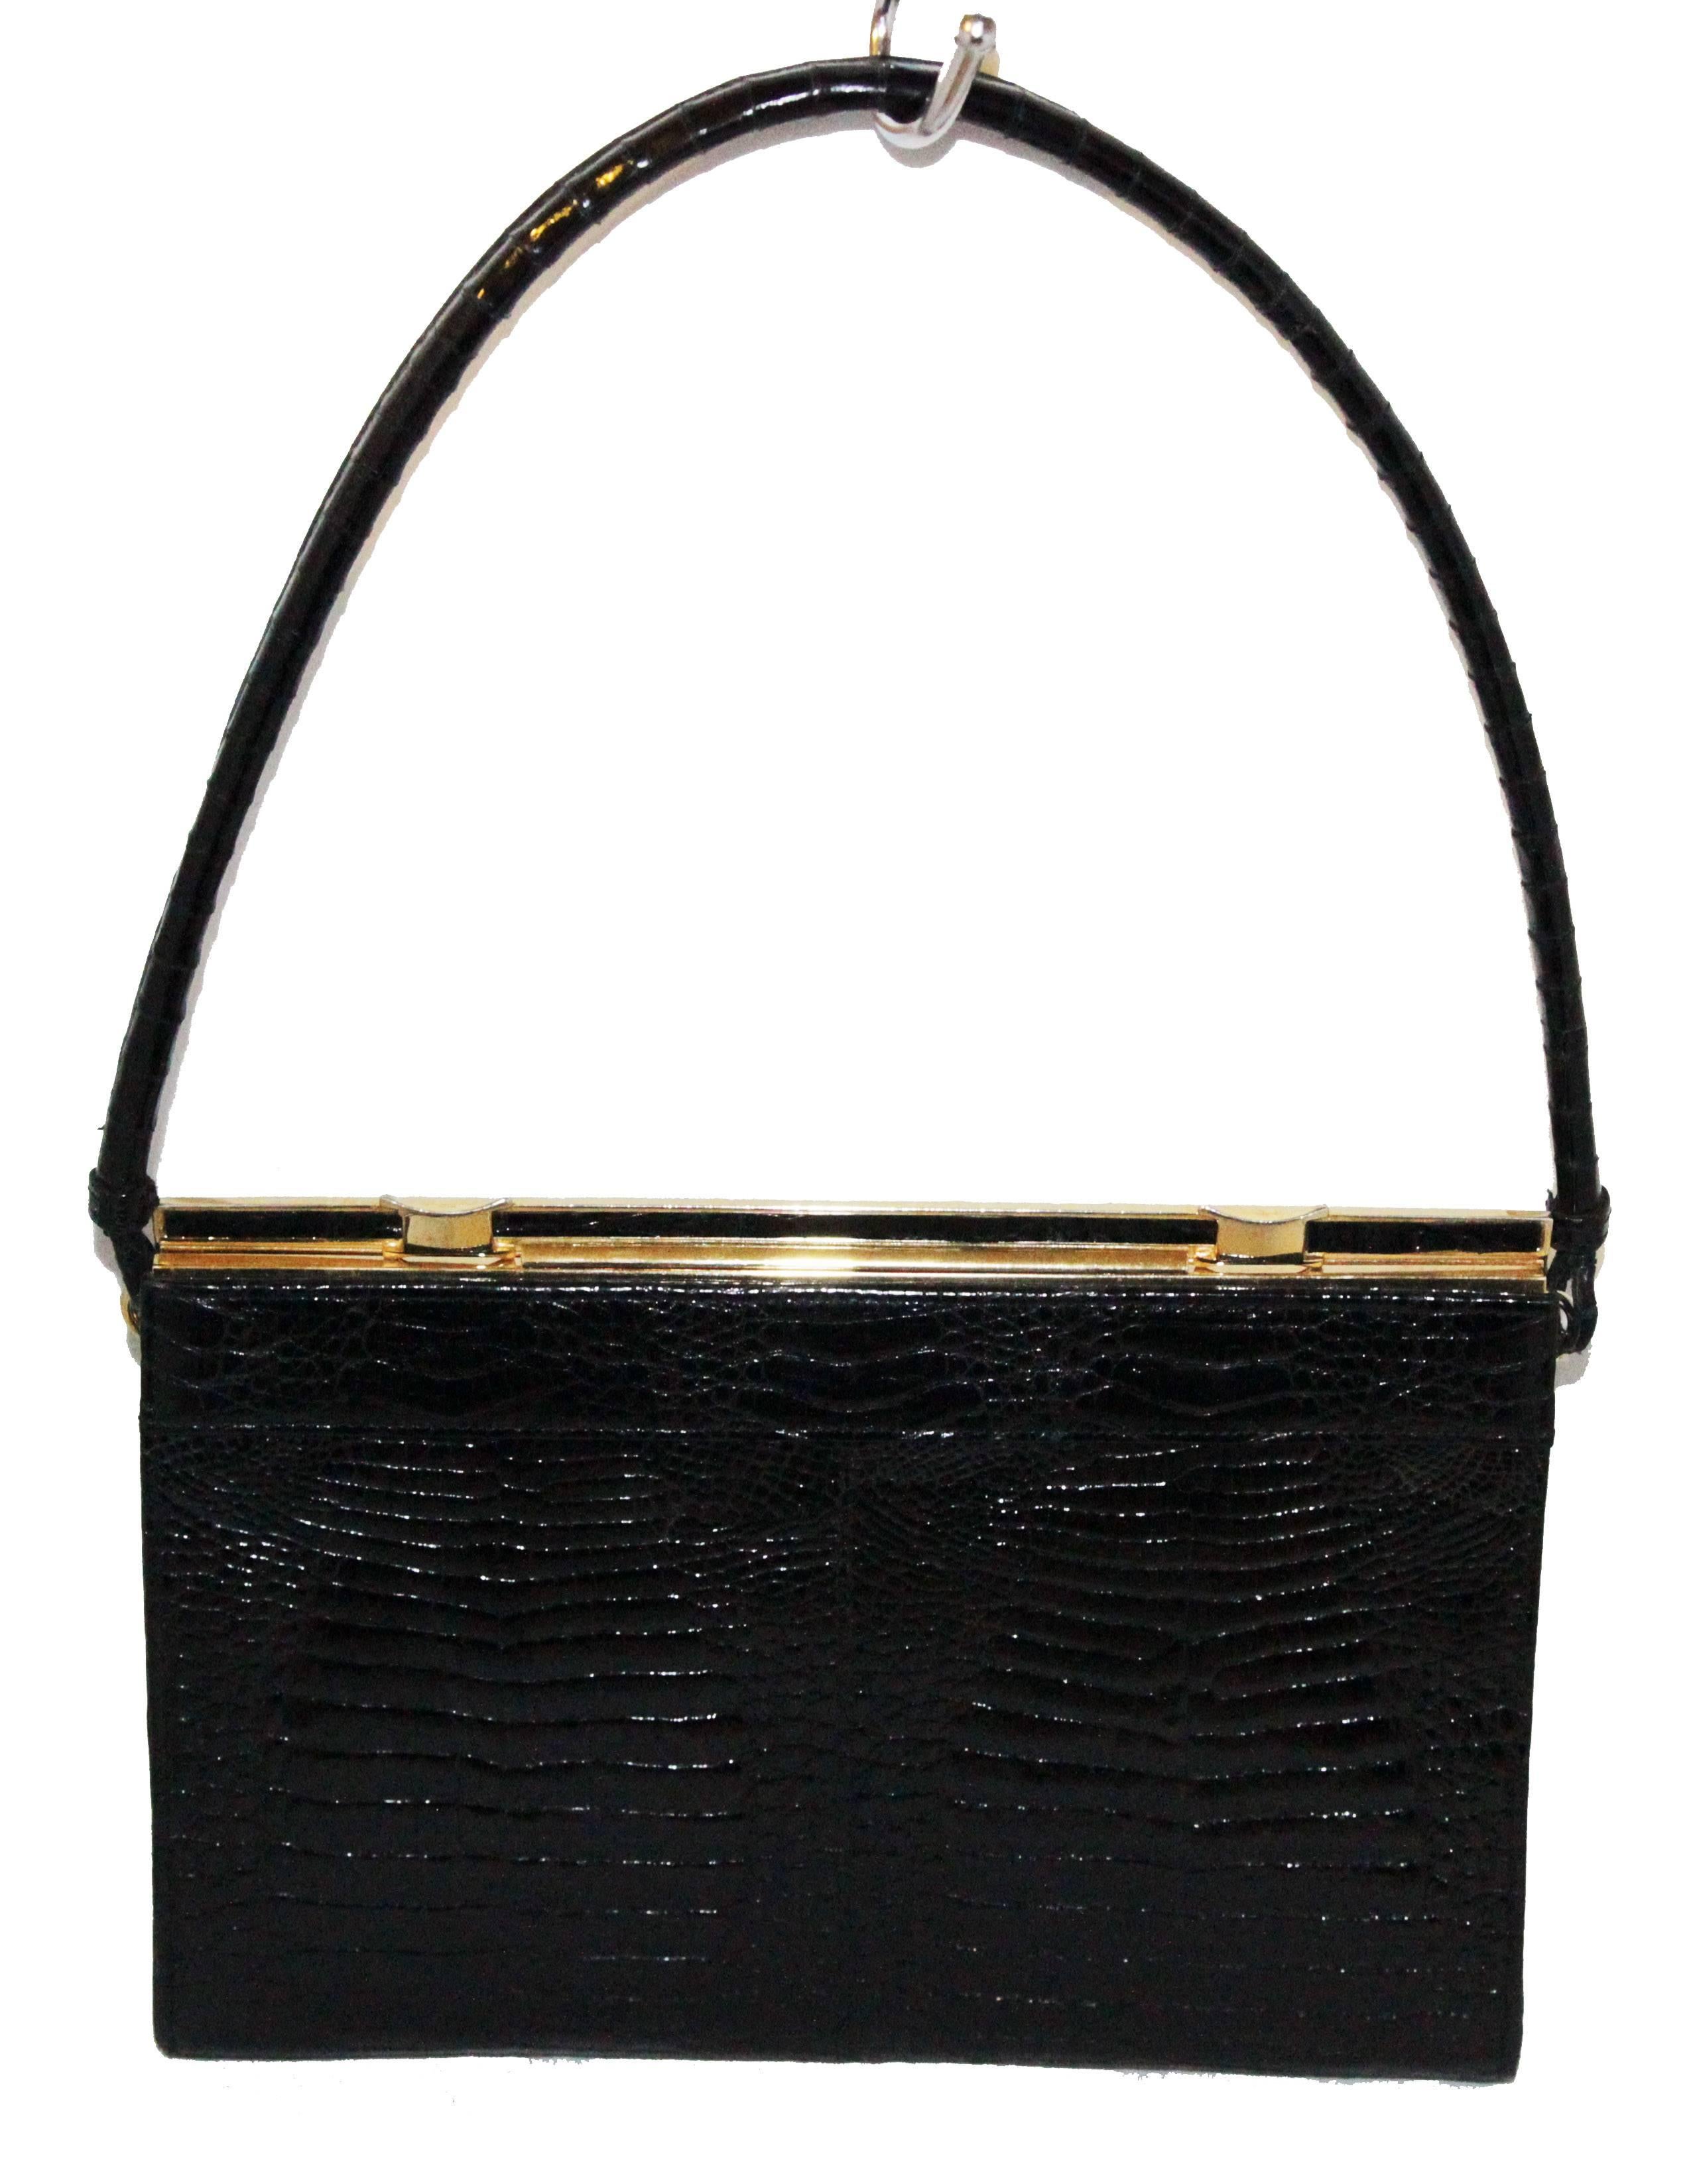 Made of black baby crocodile leather skin, gold metal hardware. Black calf leather lining. Divine quality! Early 70s

Size: 24 x 16.7 x 4 cm - 9.5 x 6.6 x 1.6 in. 

Marked: CIRV certification of crocodile, Assma Creation 

Excellent condition